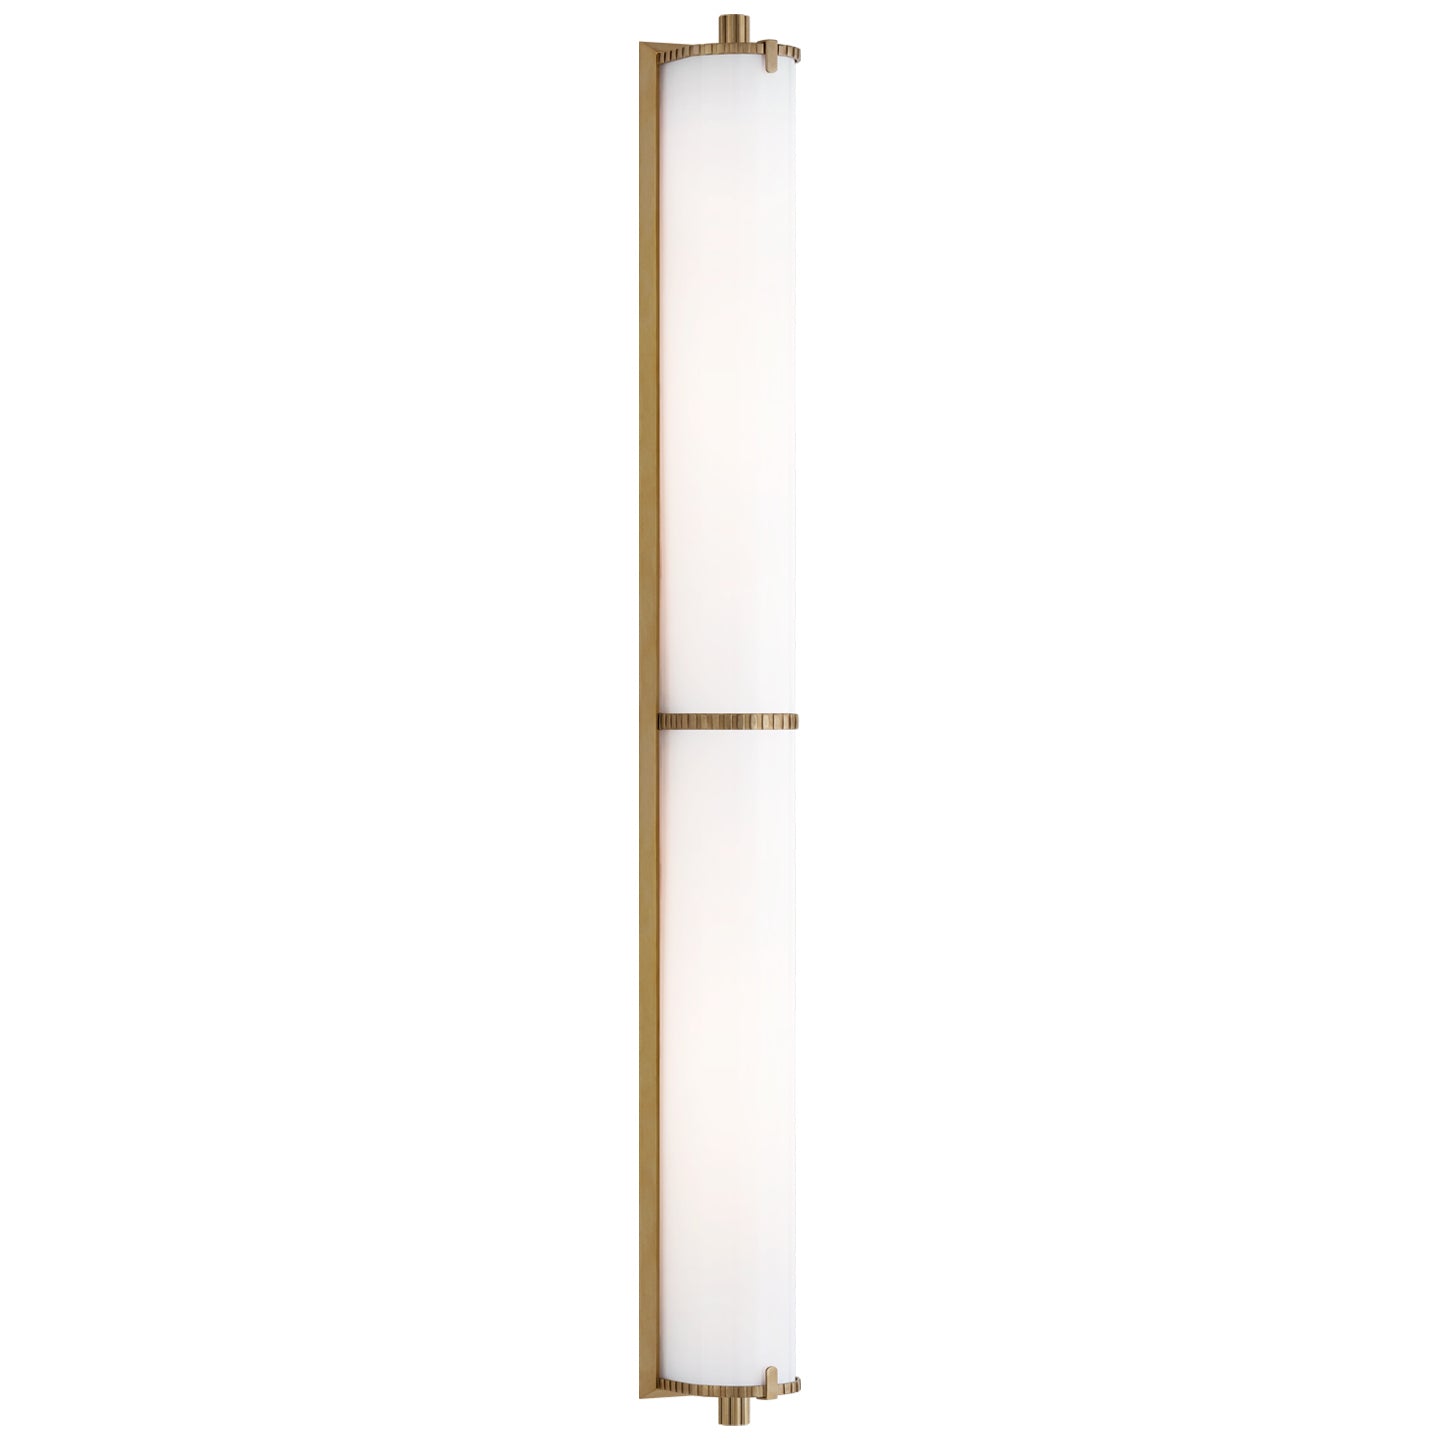 Load image into Gallery viewer, Visual Comfort Signature - TOB 2193HAB-WG - LED Bath Lighting - Calliope Bath - Hand-Rubbed Antique Brass
